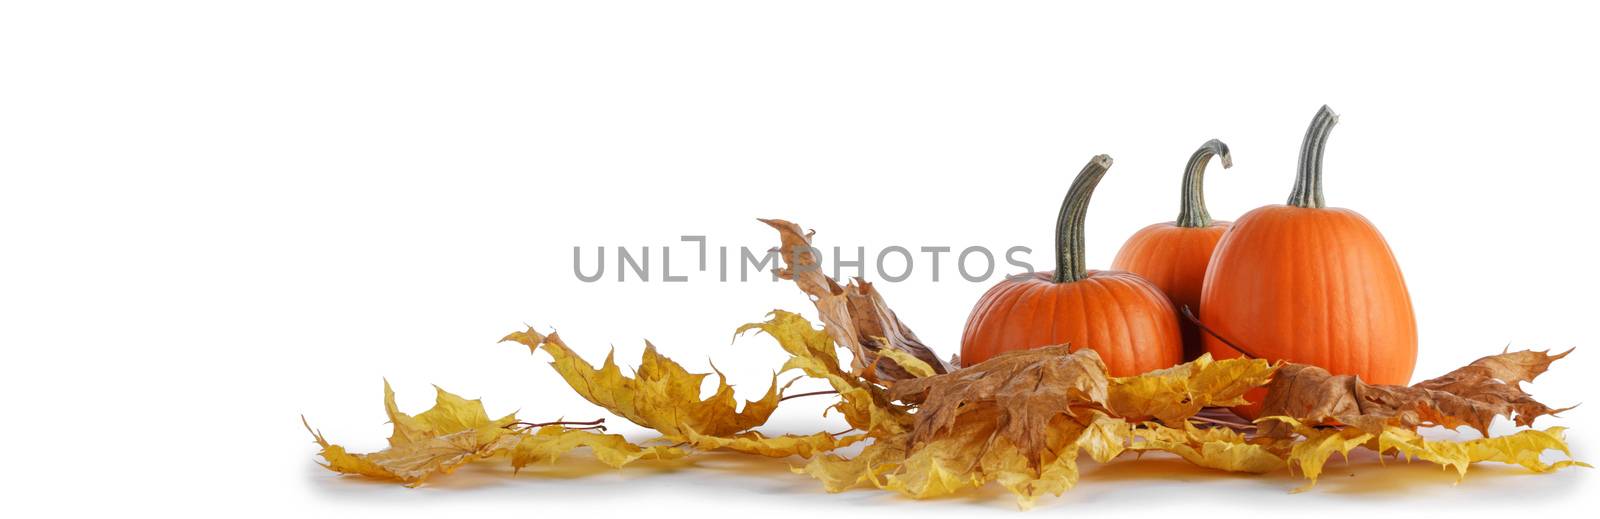 Pumpkins and fall yellow maple leaves isolated on white background